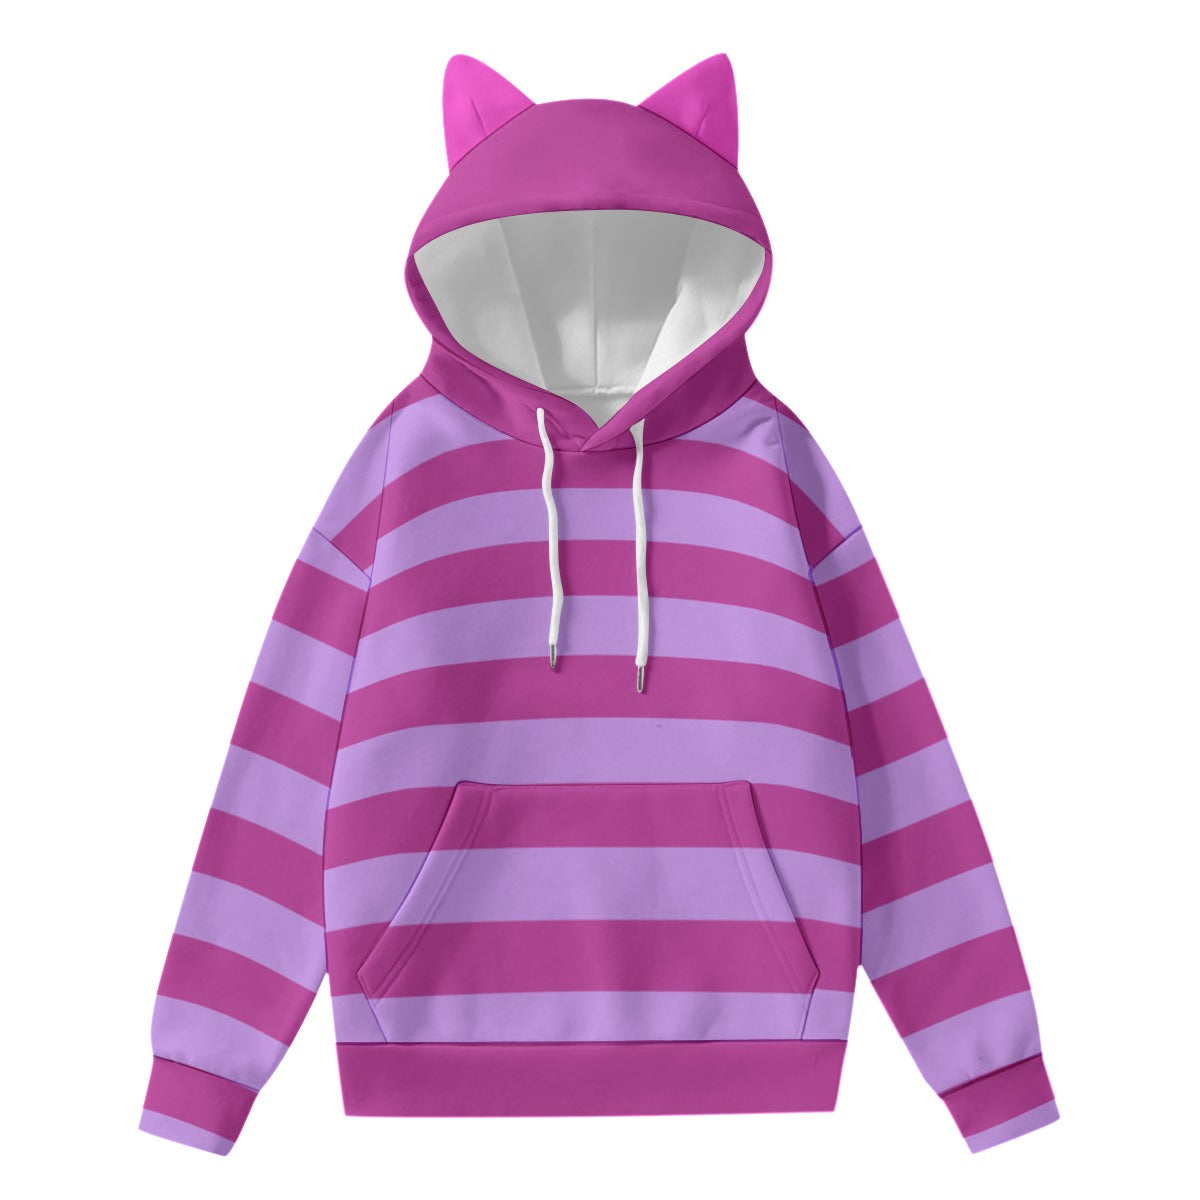 Cheshire Cat Hoodie With Decorative Ears Adult Costume Striped